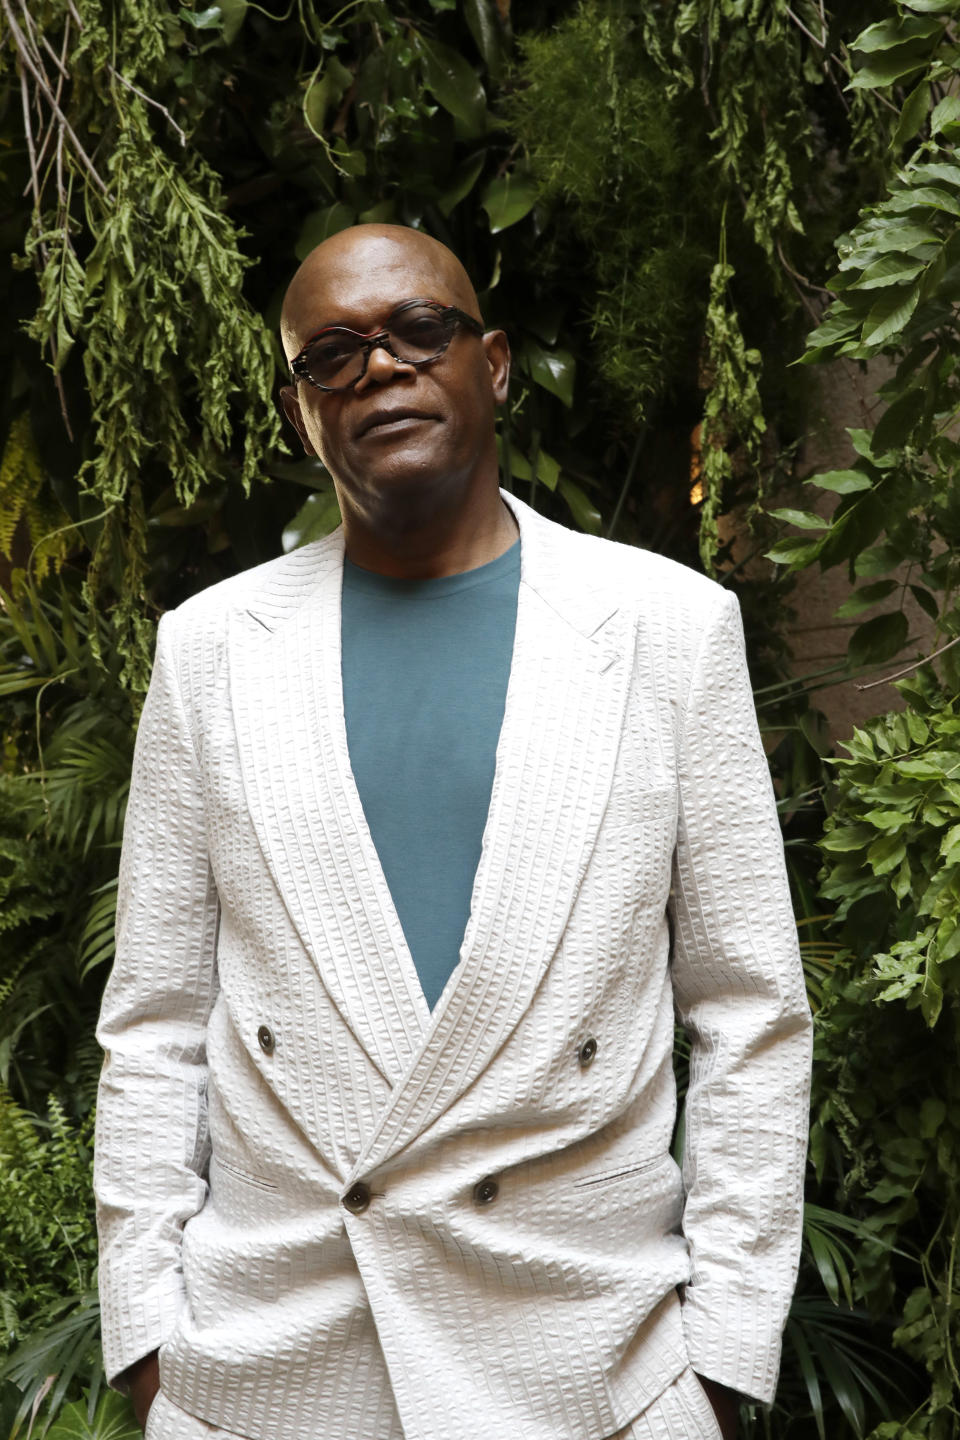 Actor Samuel L. Jackson attends the Armani men's Spring-Summer 2020 collection, unveiled during the fashion week, in Milan, Italy, Monday, June 17, 2019. (AP Photo/Luca Bruno)